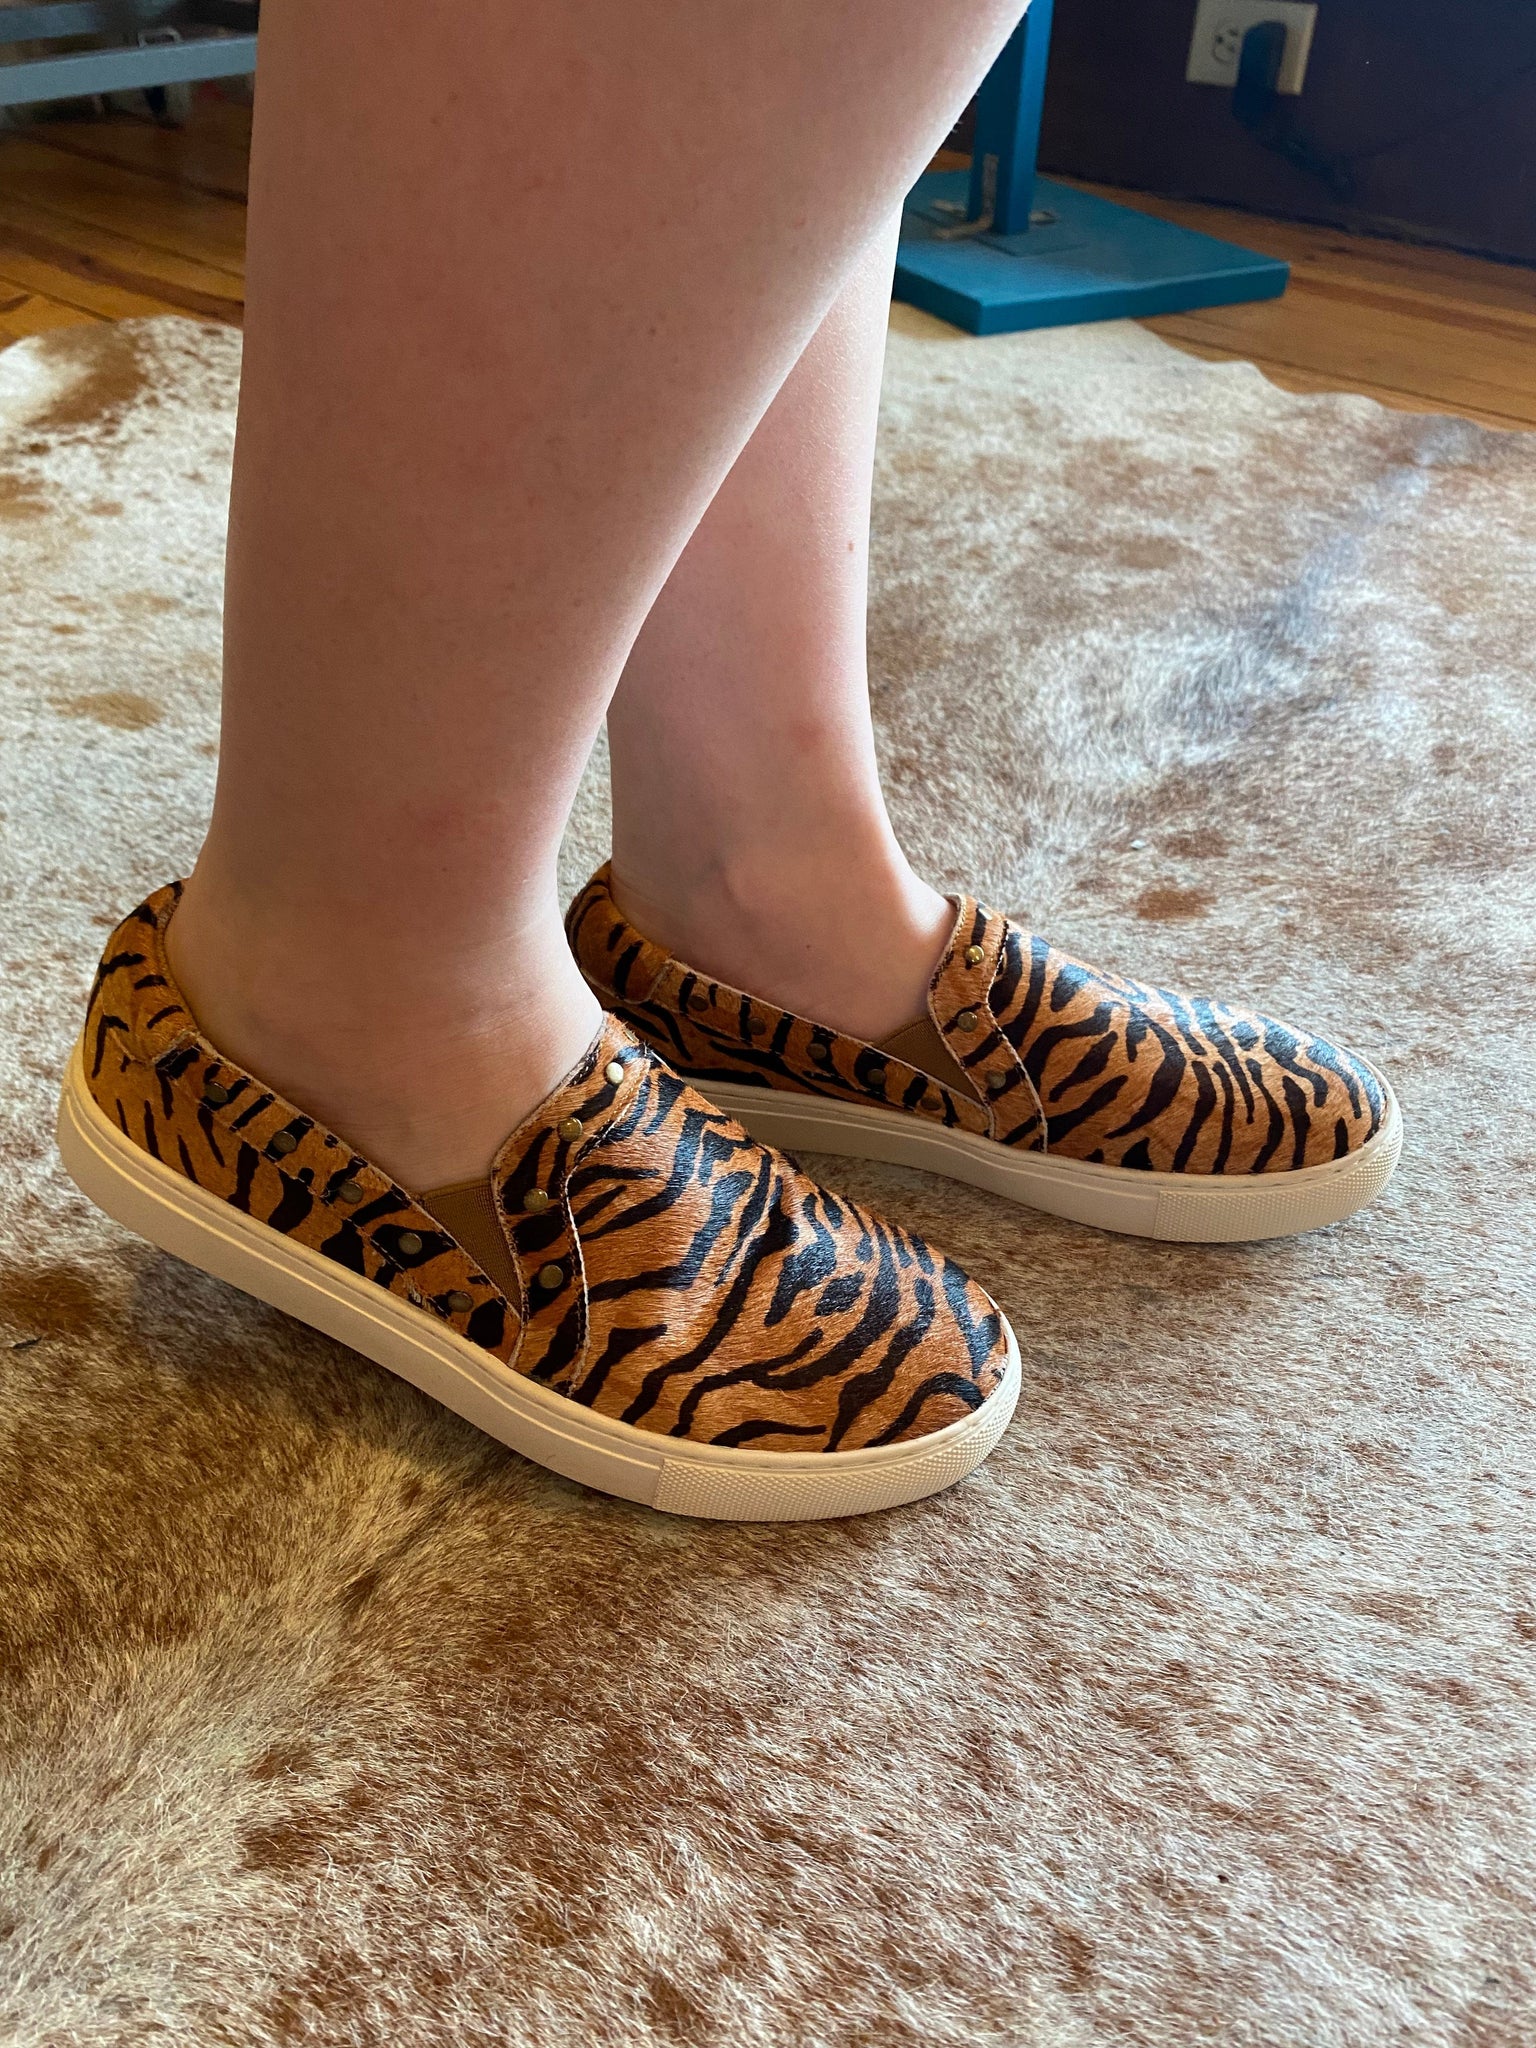 Pine Top Slip On Tiger Print The Sparkly Pig Shoes